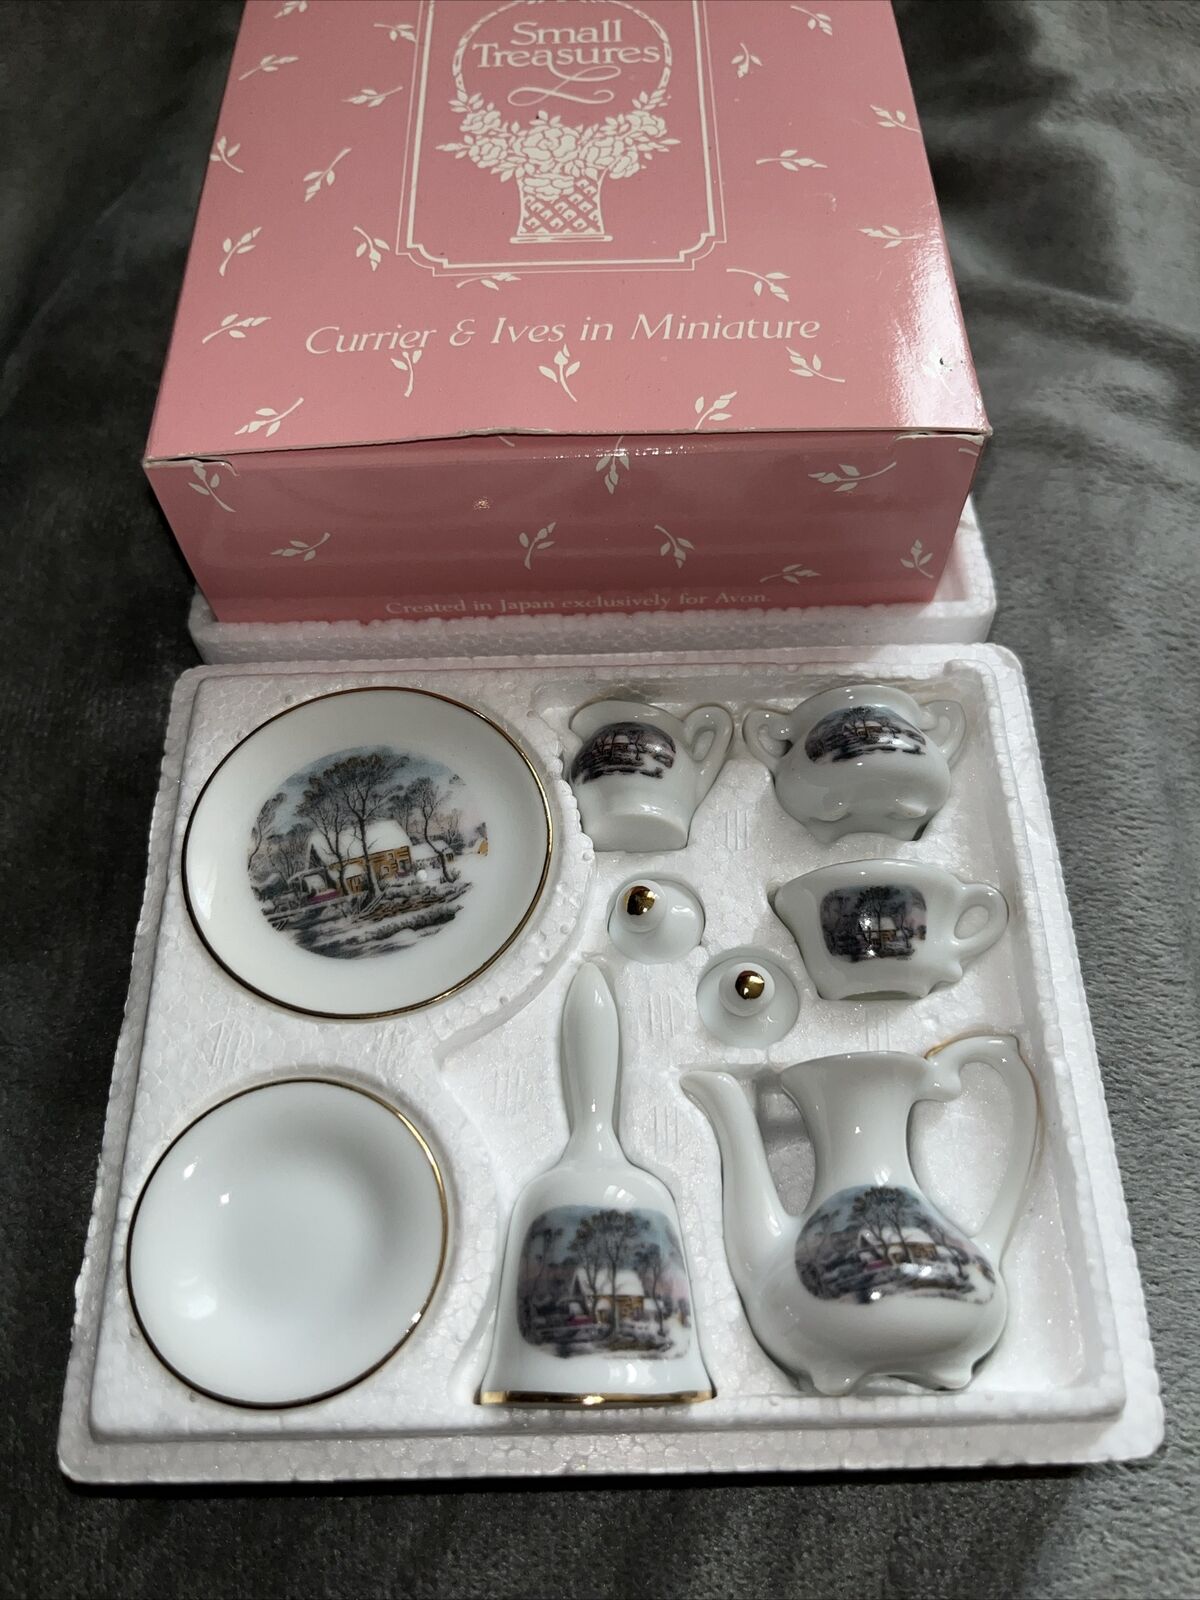 Vintage Avon Small Treasures Currier & Ives In Miniature Tea Set 9pc New